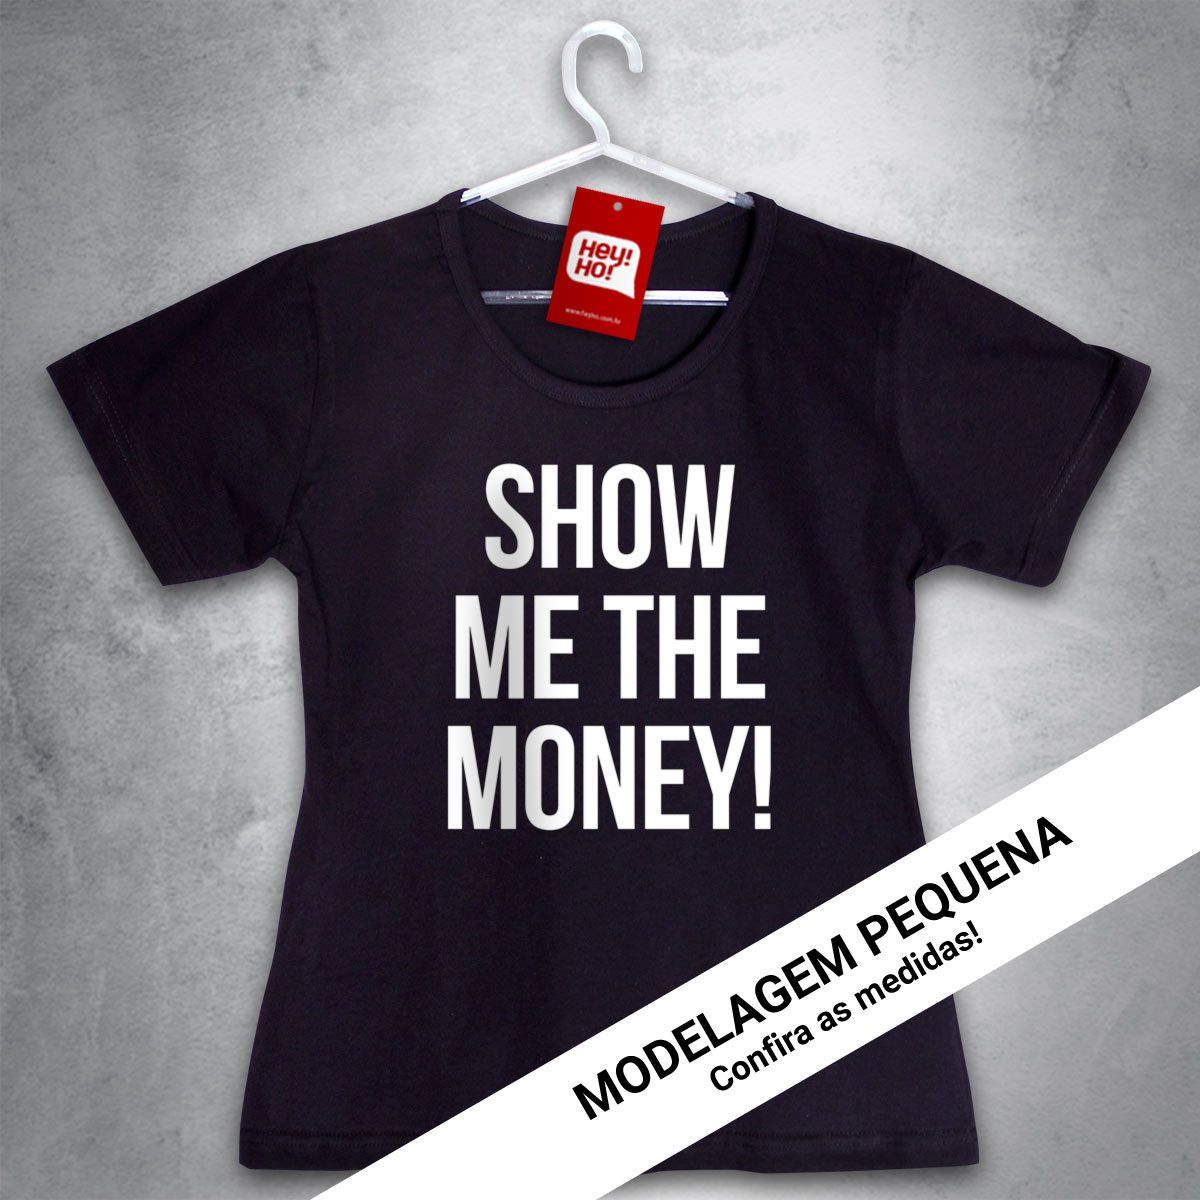 JERRY MAGUIRE - Show me the money